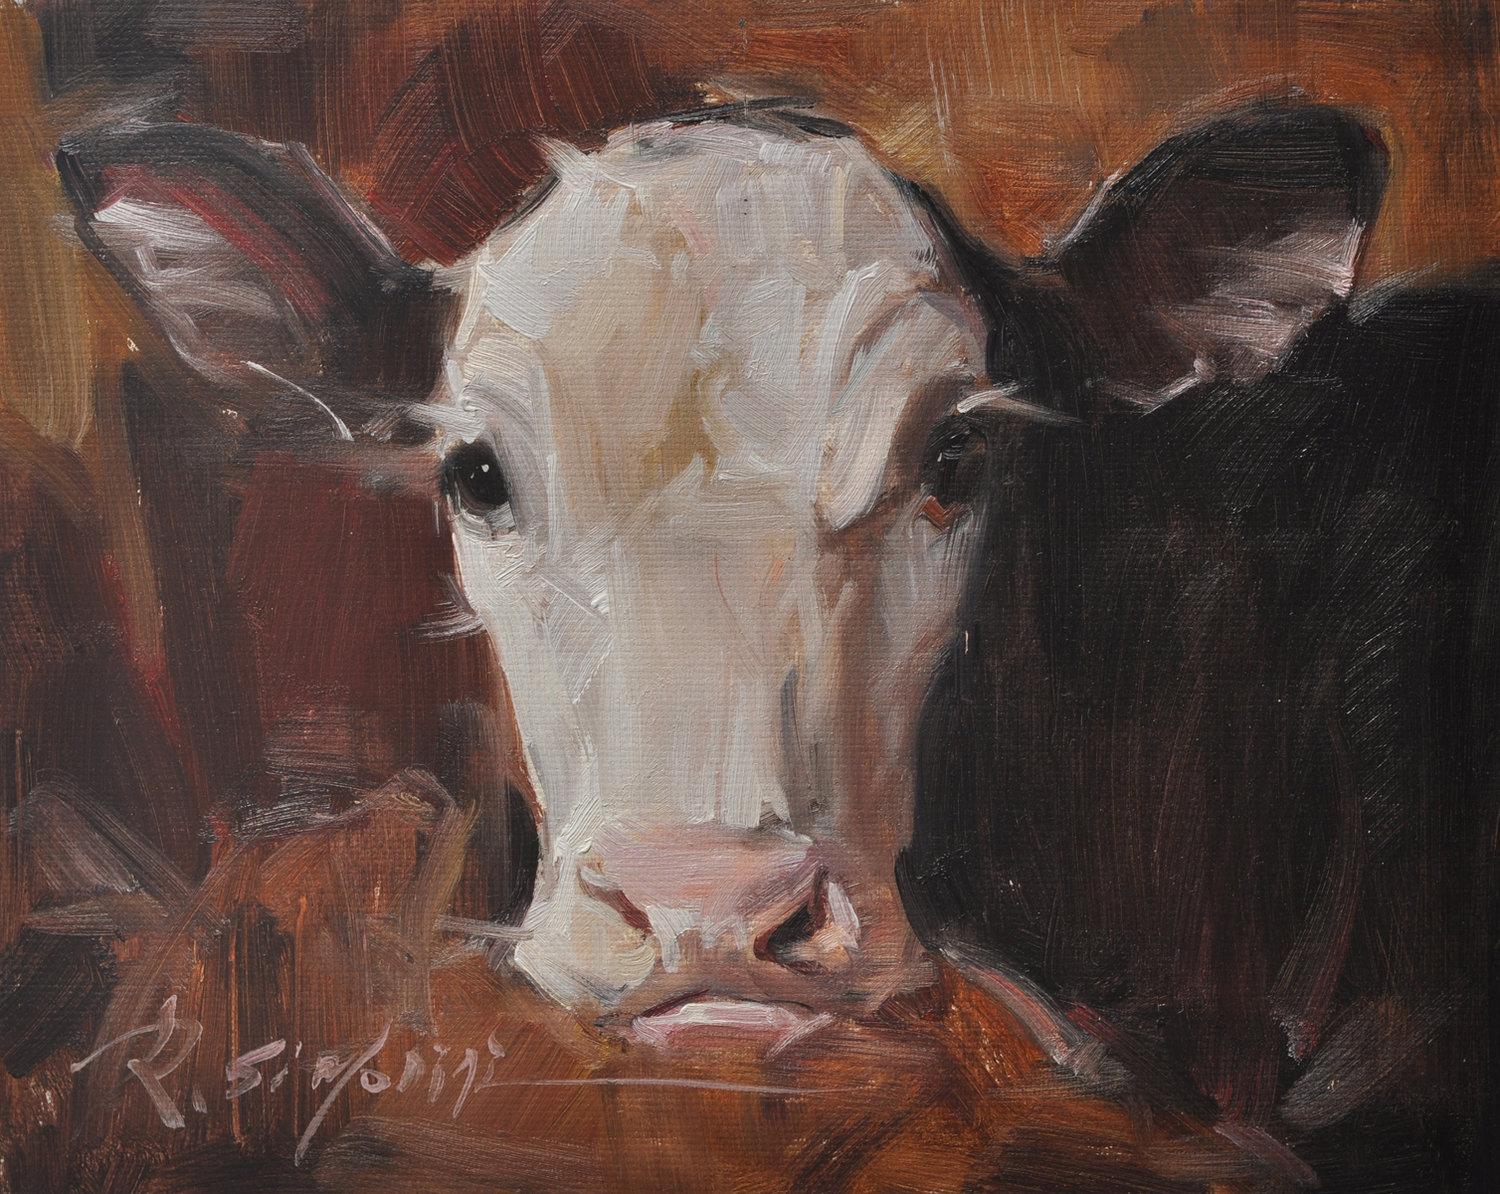 This painting by artist Ray Simonini titled "Sue Ellen" is a 8x10 farm animal oil painting on canvas featuring a portrait of a dark brown cow with a pink nose against a dramatic burnt umber background. 

About the artist:
Simonini was born in China